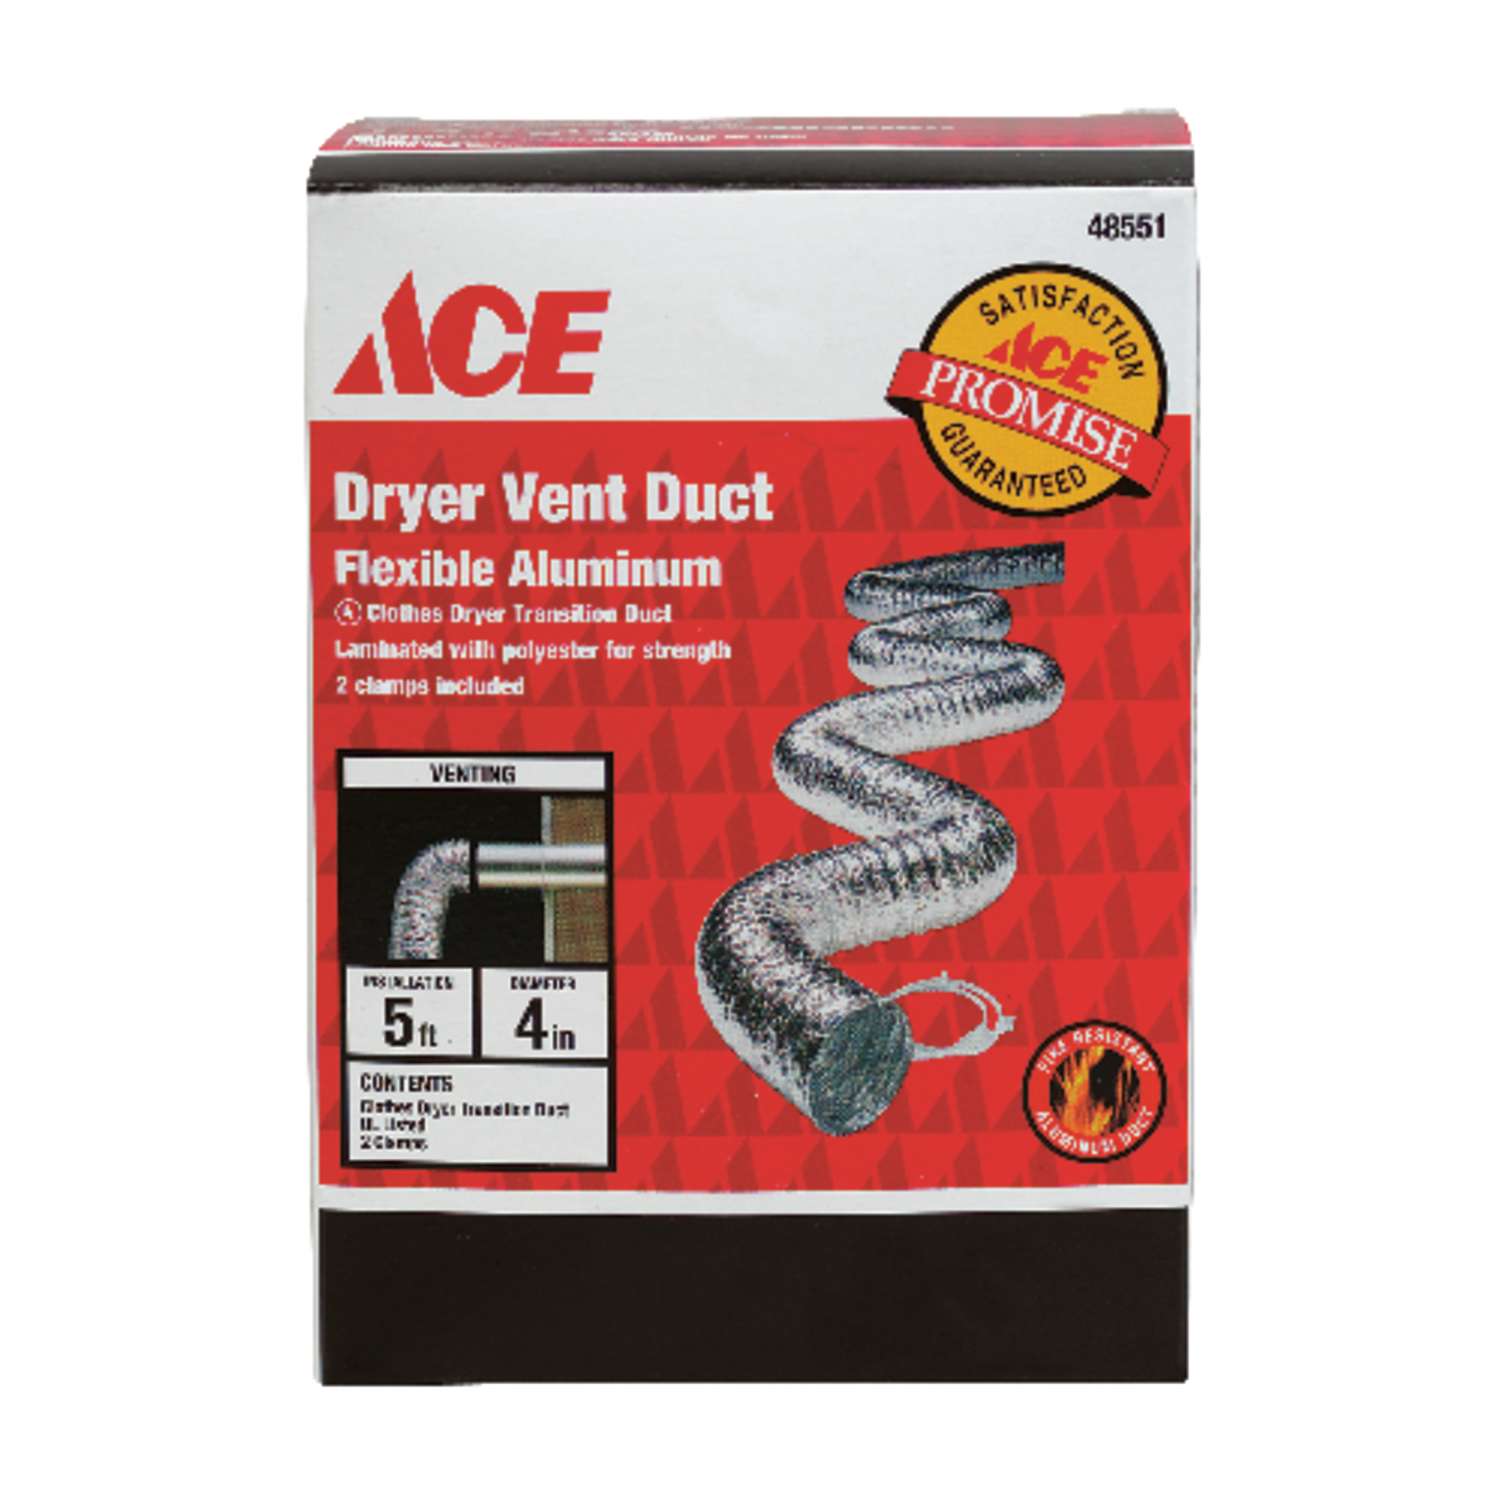 NEW ACE Silver/White Aluminum Dryer Vent Duct 4" x 20' ACEF0420B 